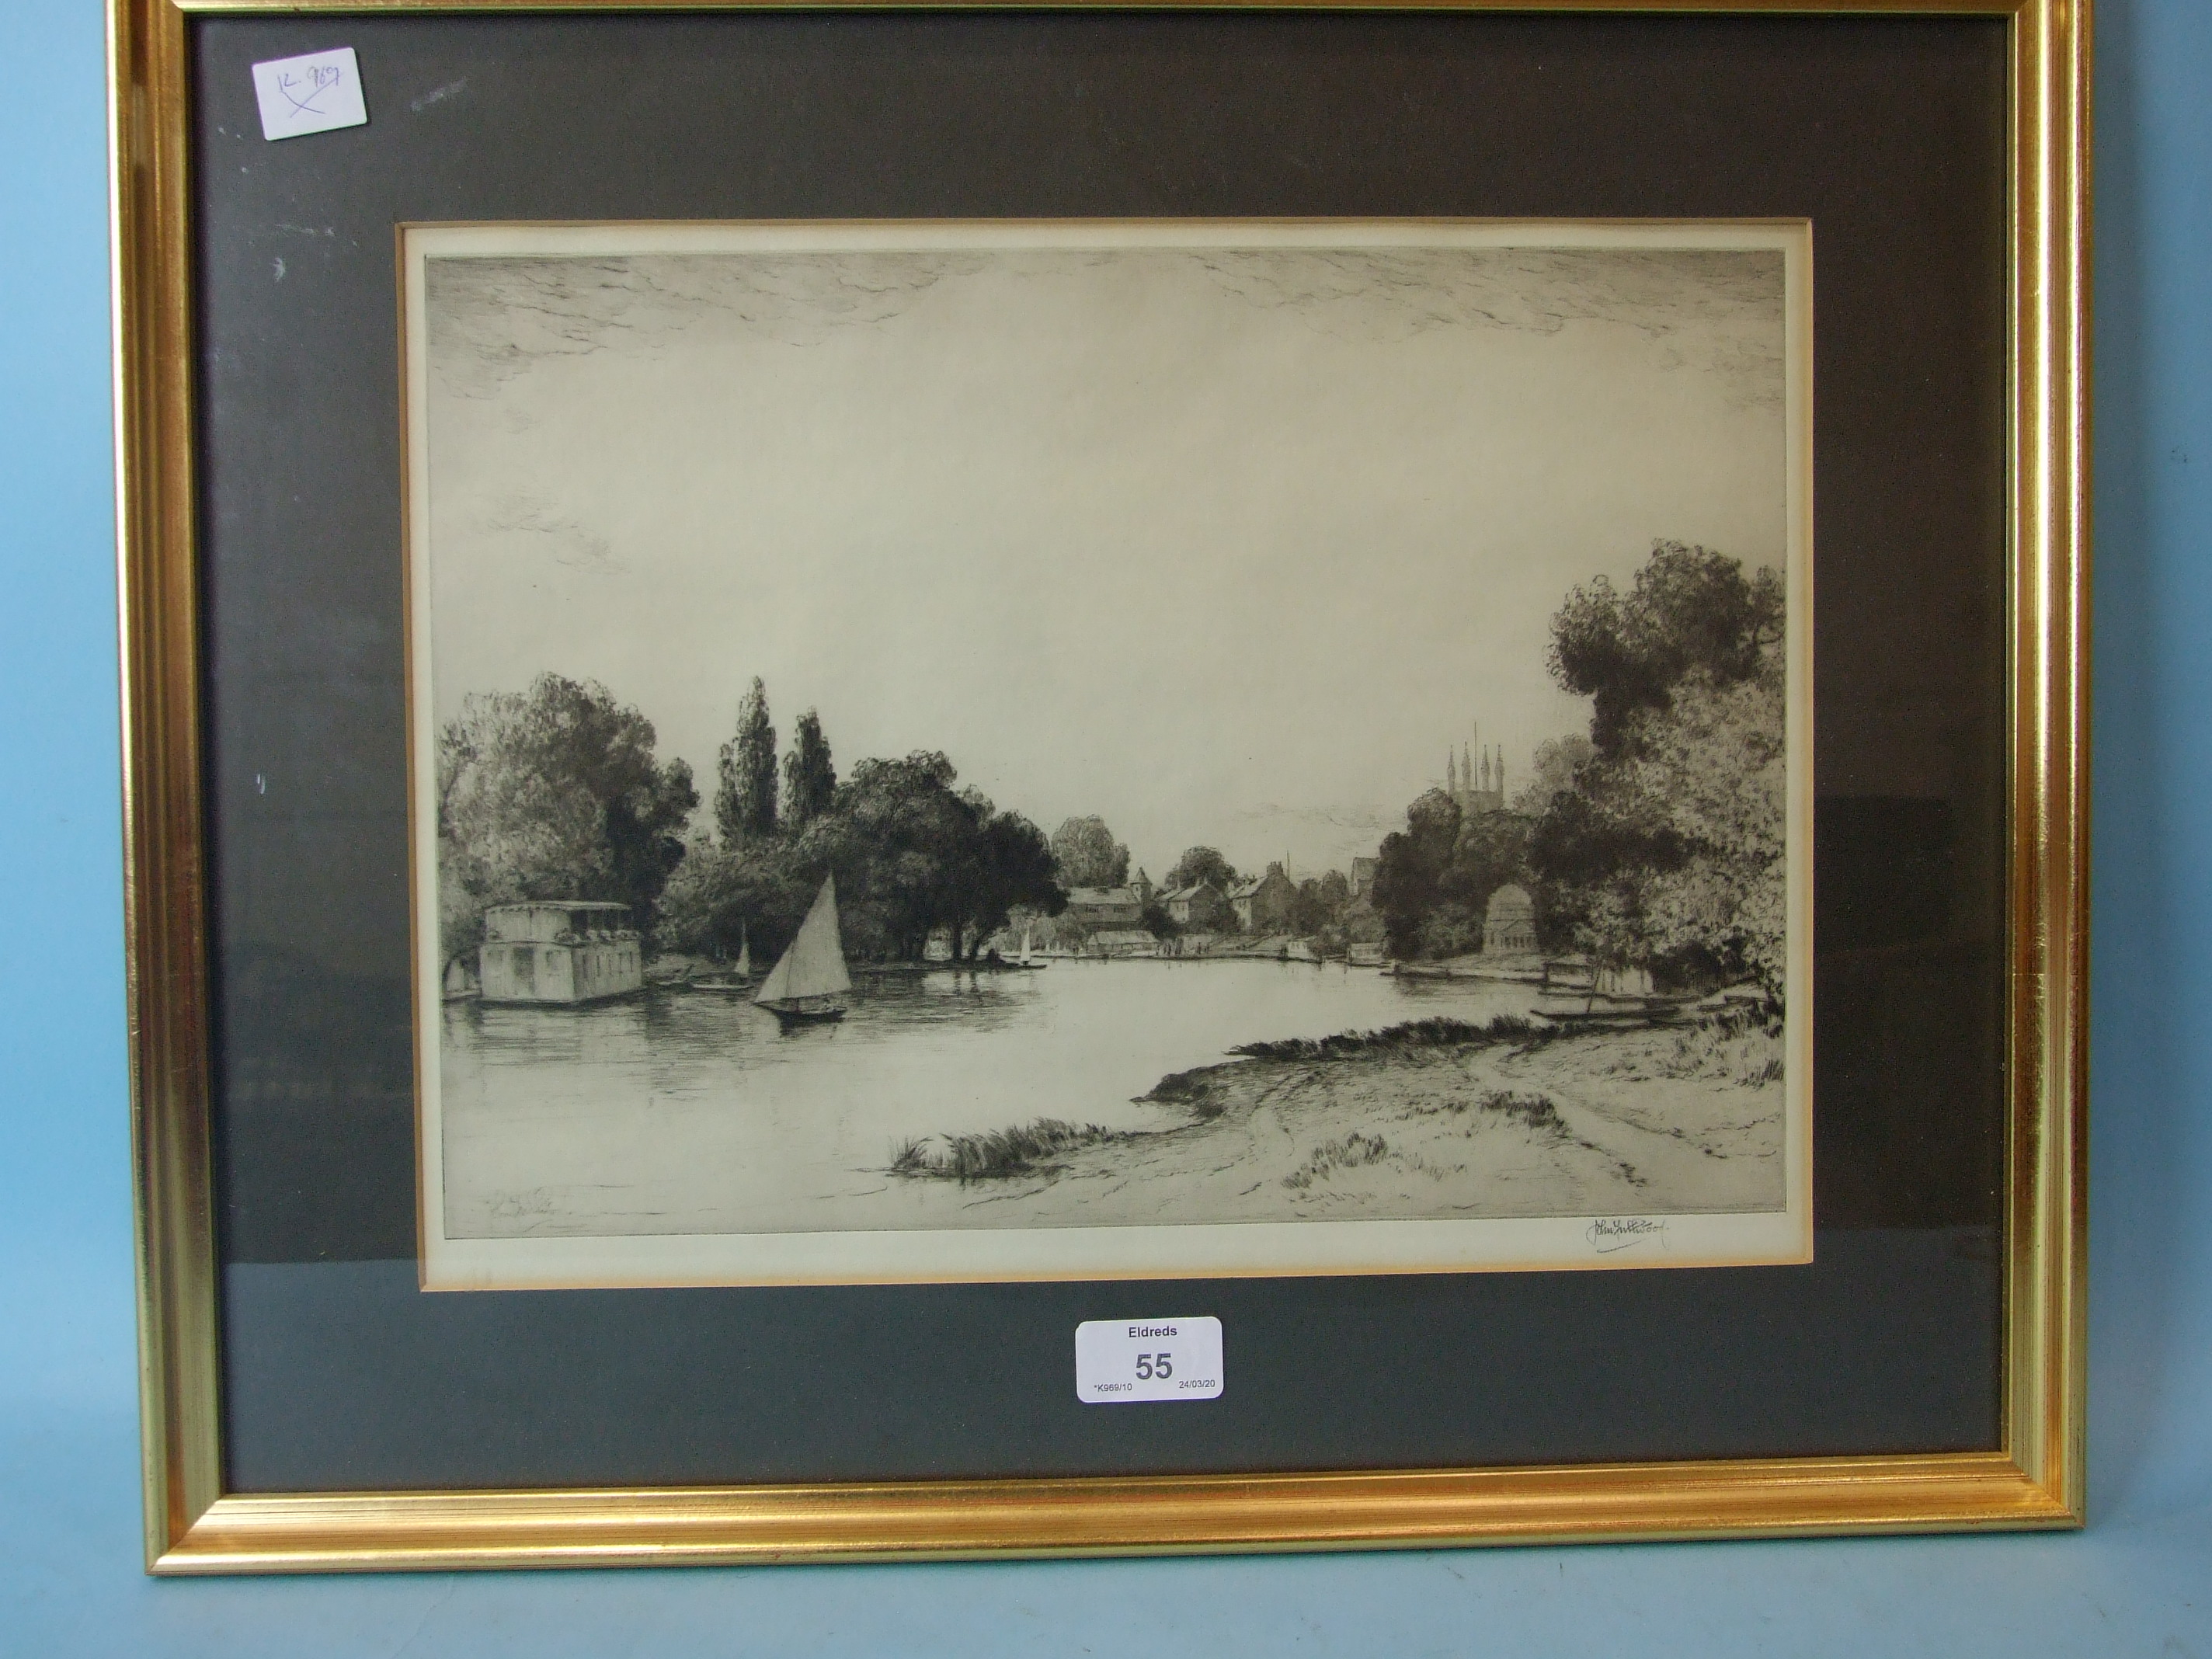 John Fullwood FSA, 'View of the River Thames', dry-point etching, signed artist's proof no. 40/2, 27